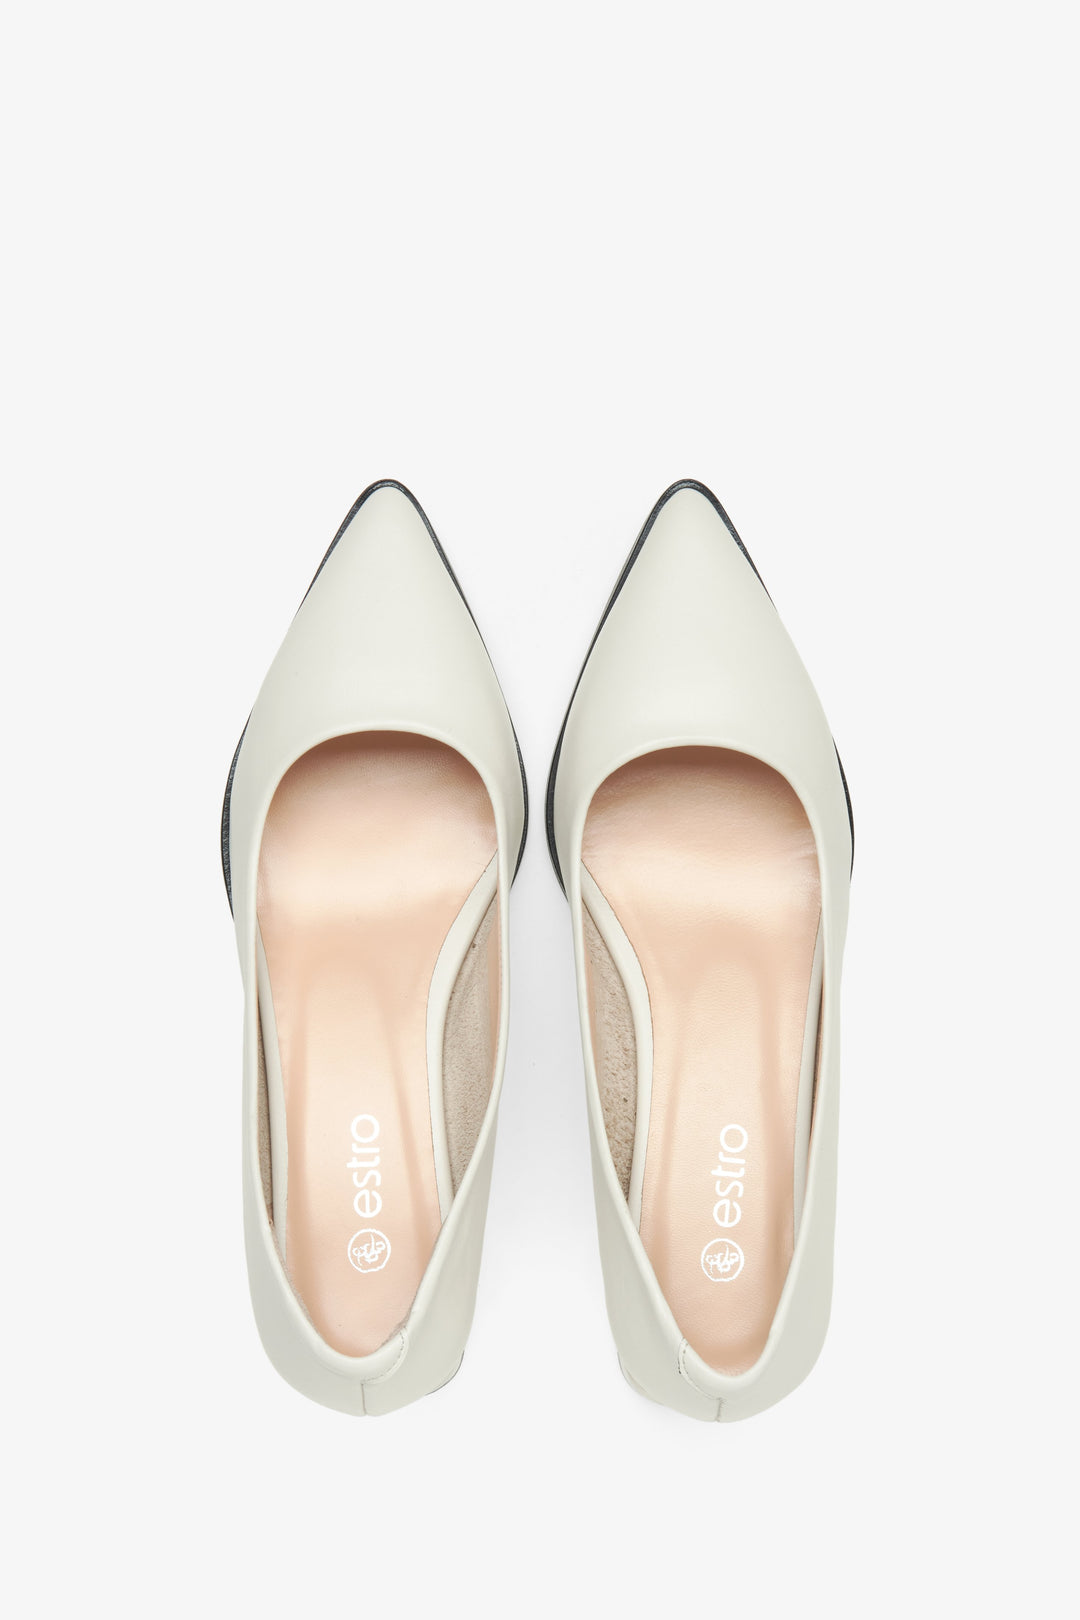 Women's leather light beige pumps by Estro with a pointed toe - top view presentation of the footwear.